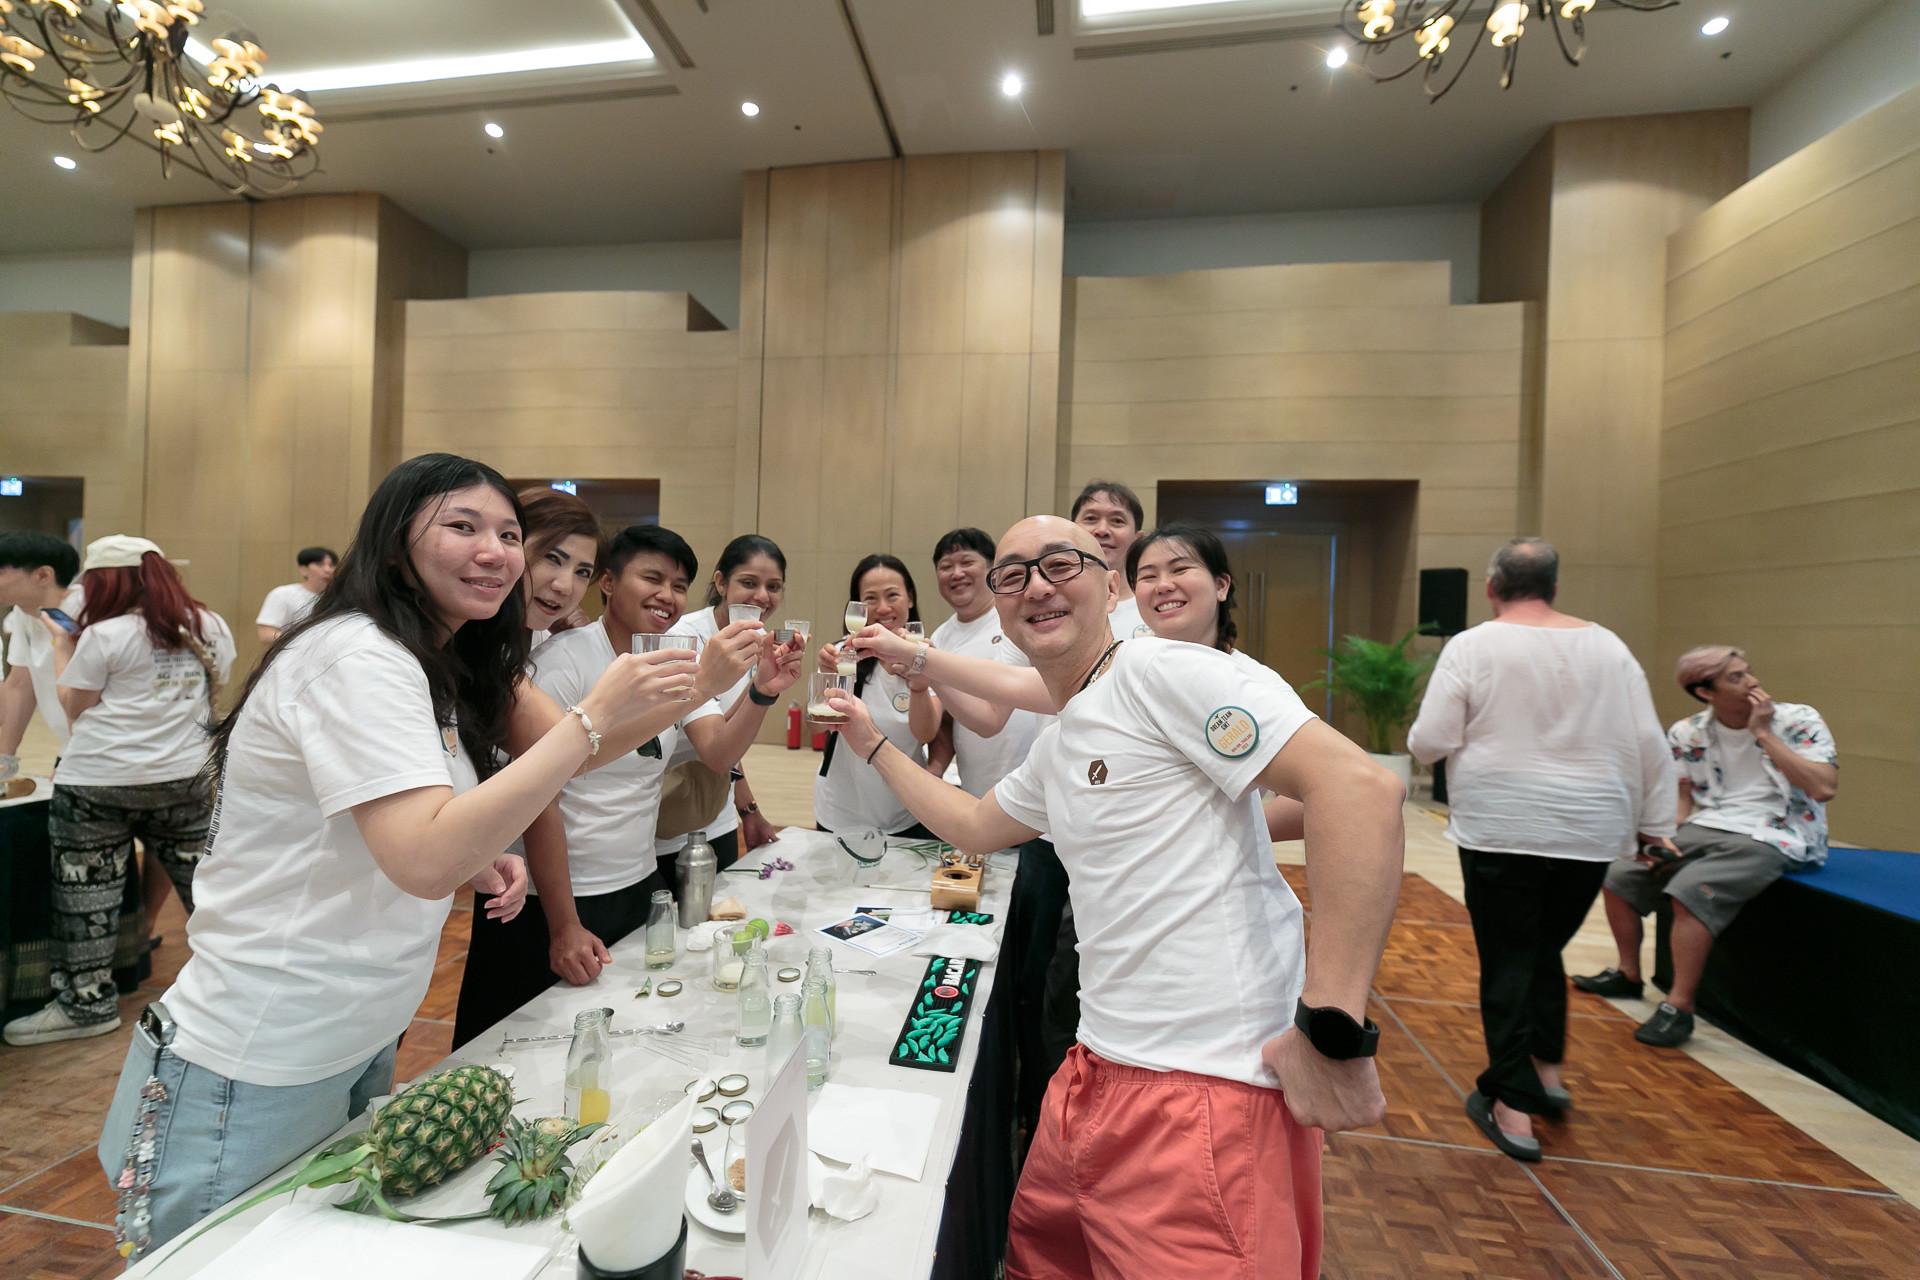 Teams will also take part in bartending-themed relays and challenges between cocktail making to keep the pace fast and fun